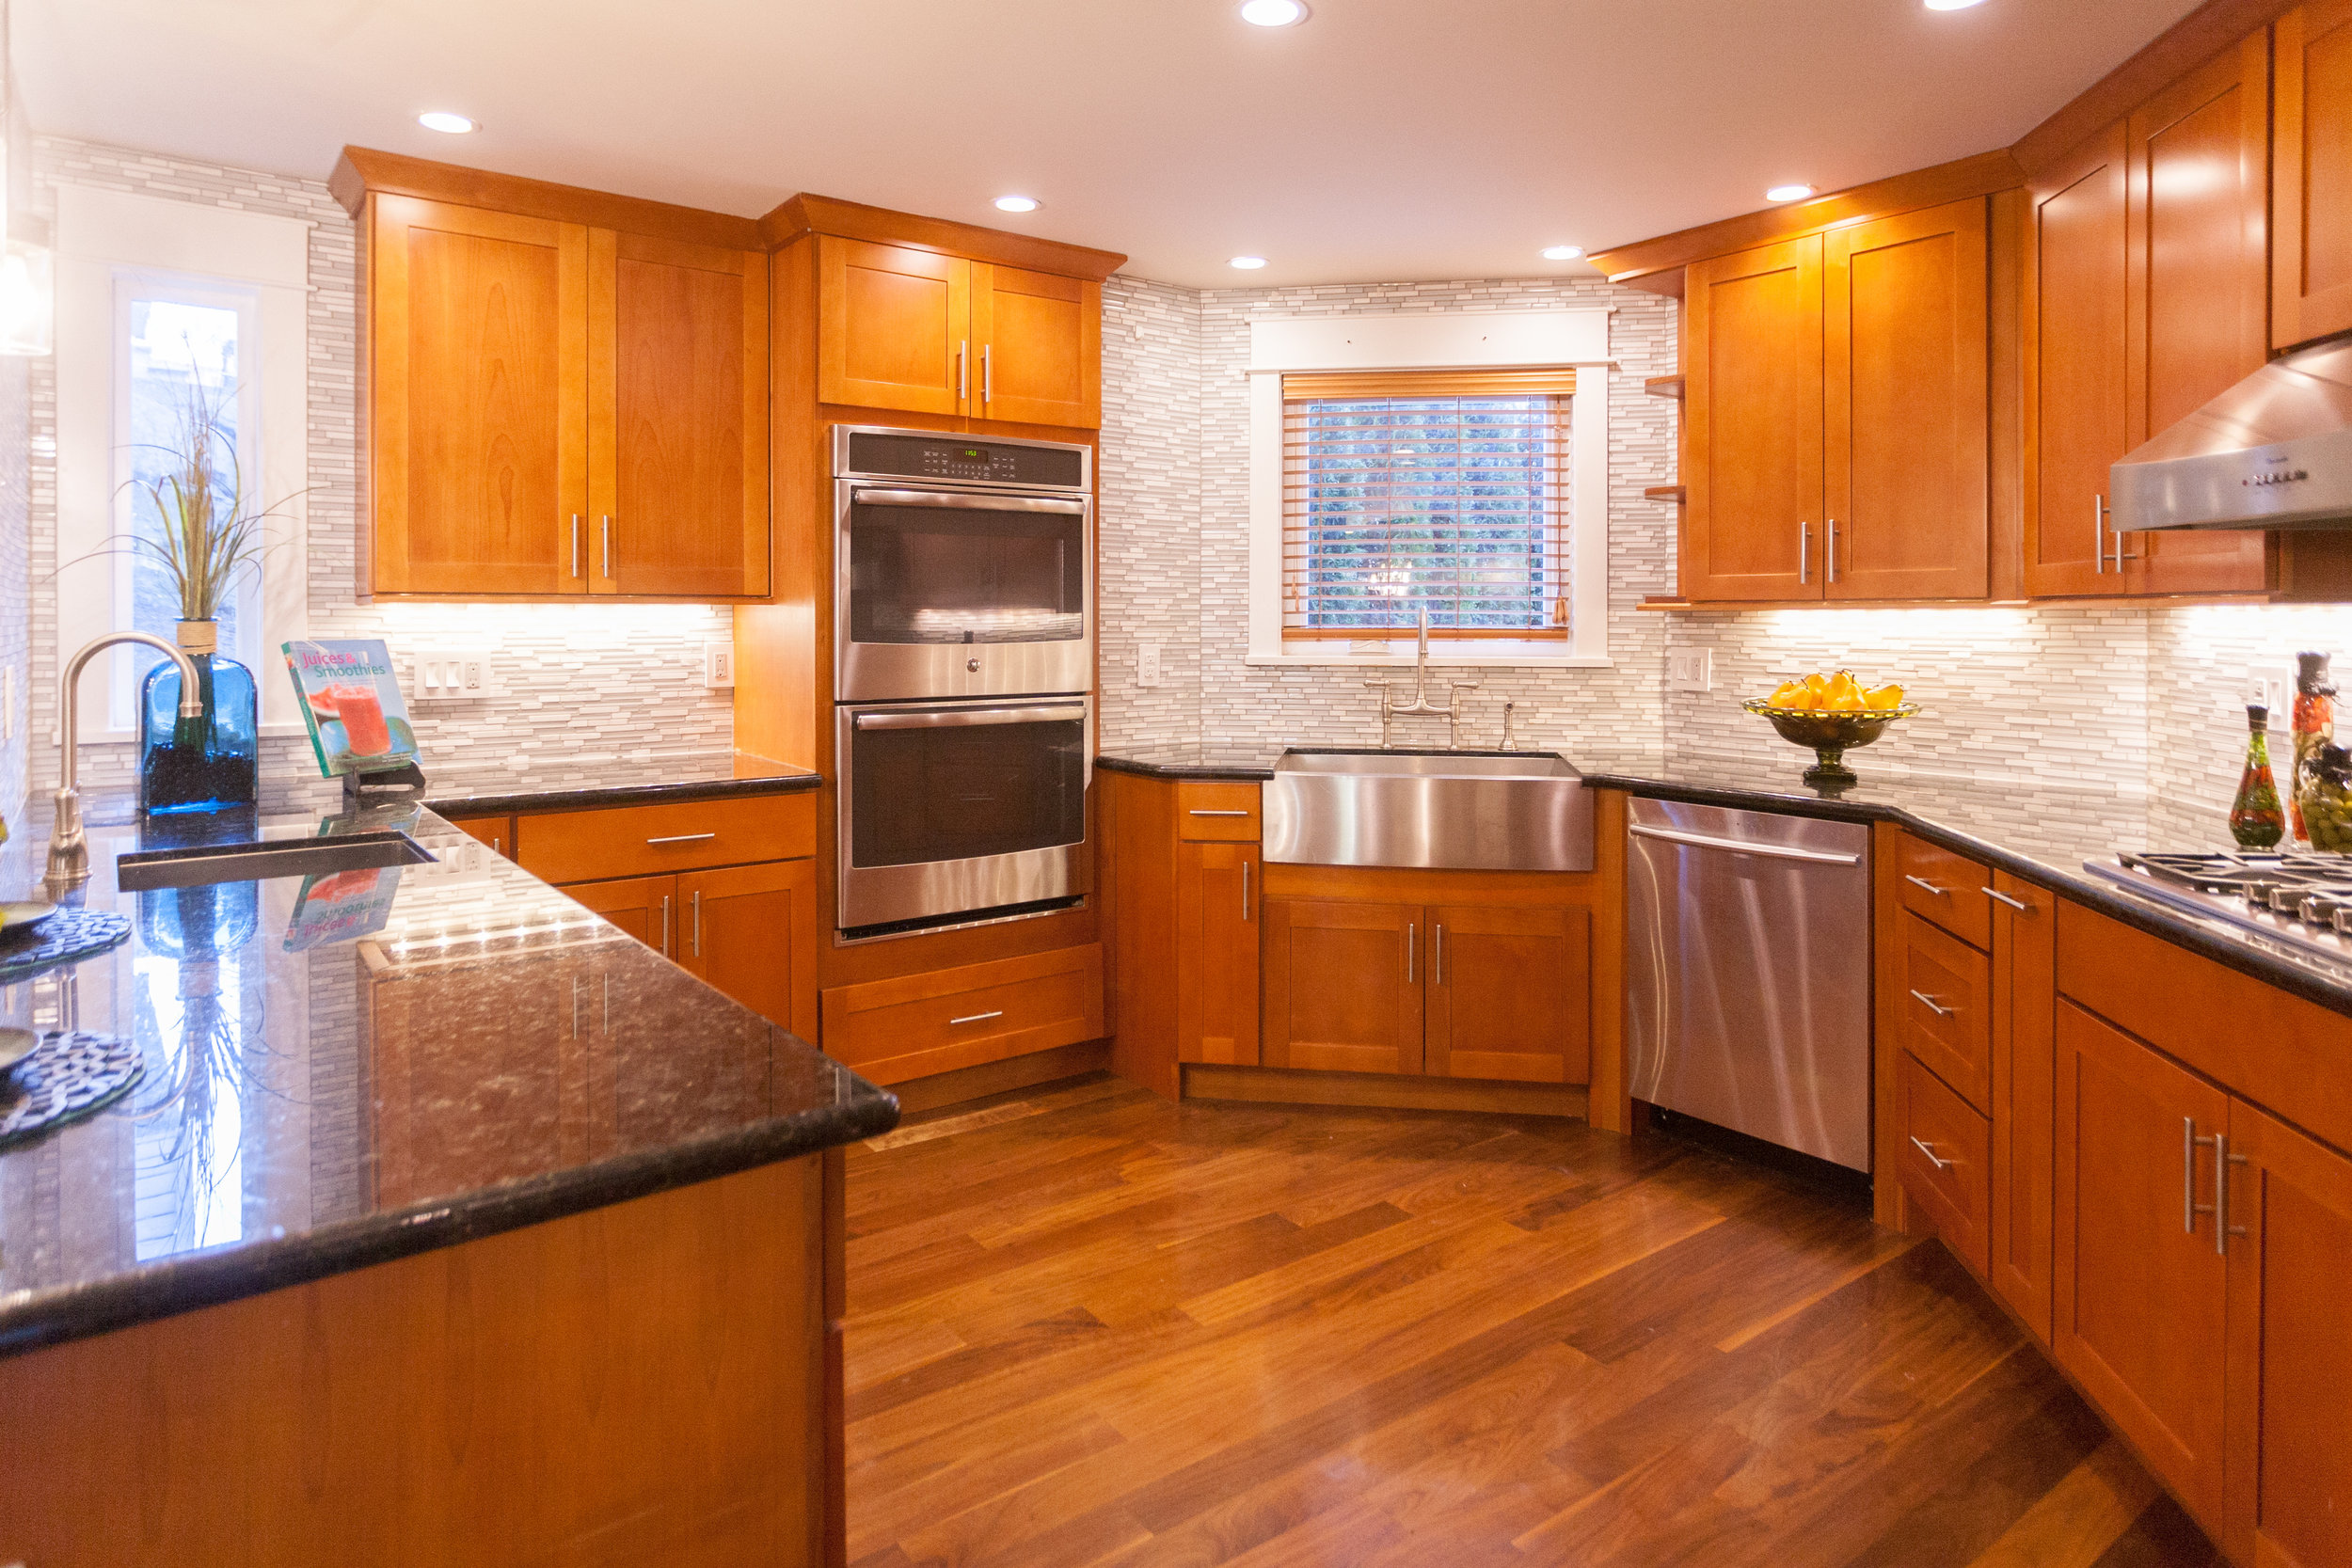  Cabinet space, newer stainless steel appliances, 5-burner gas stove top,  double-oven, and a tasteful backsplash all make for an intuitive,  high-end kitchen. 